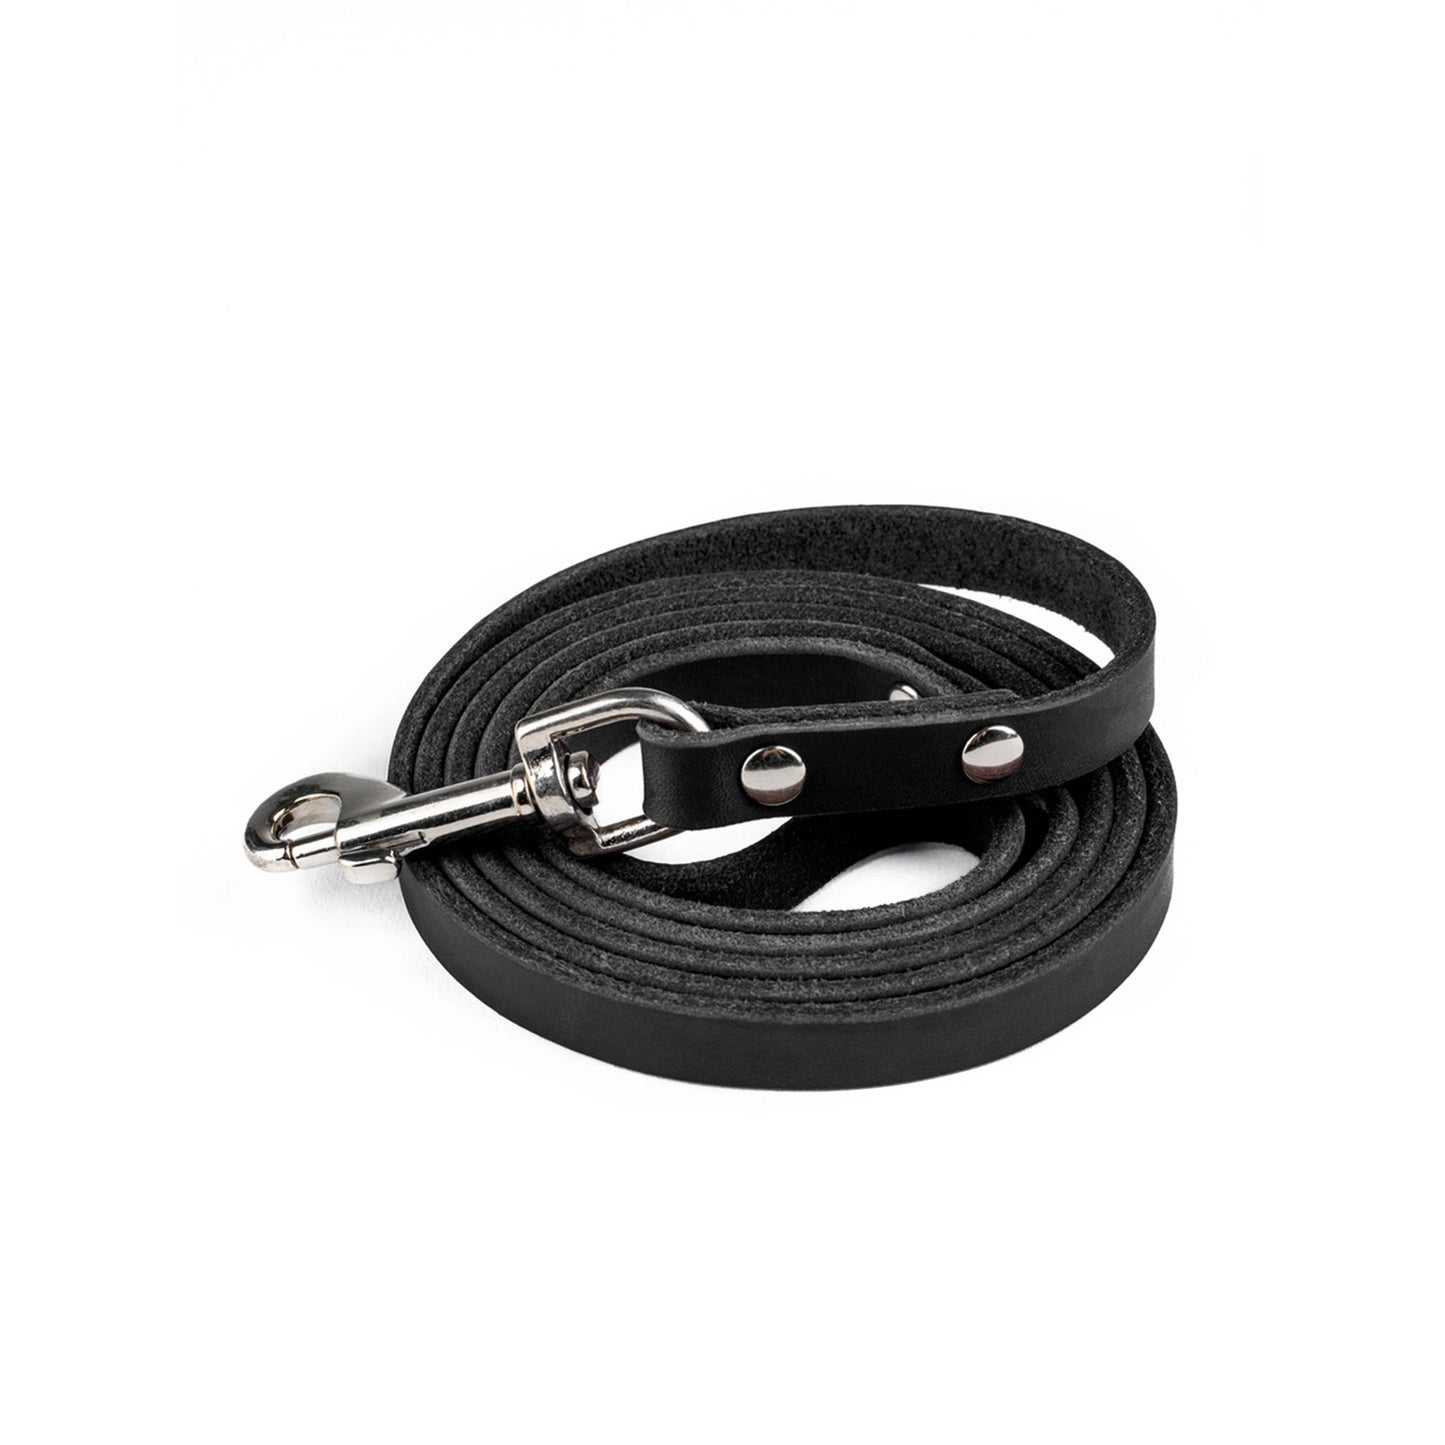 Leather Leash by Mighty Paw